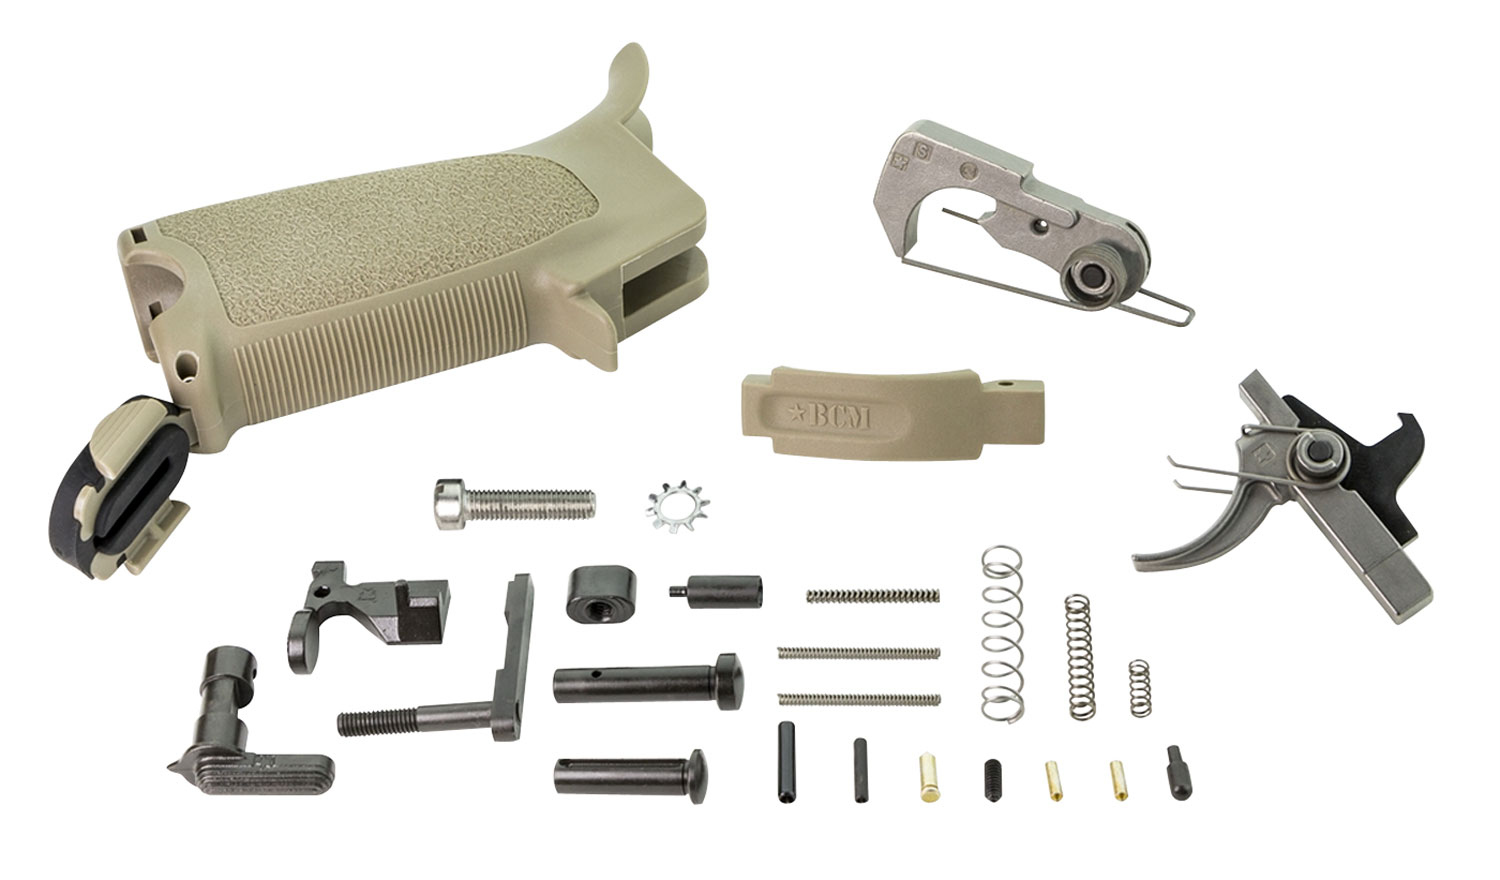 BCM PARTS KIT LOWER FDE FOR AR15 | NA | 812526020642